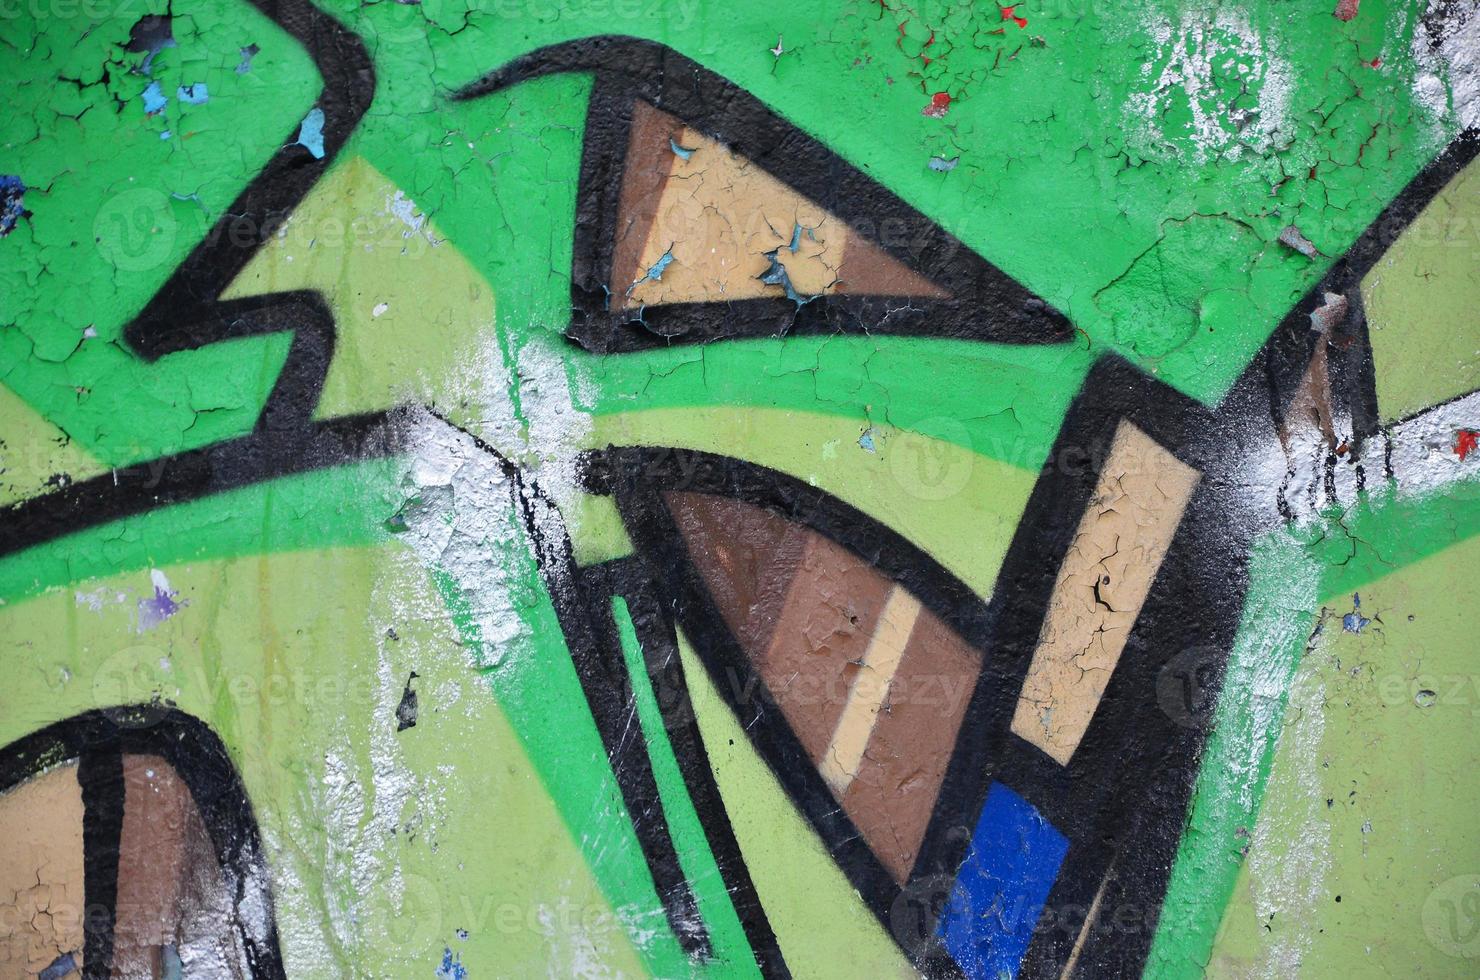 Texture of a fragment of the wall with graffiti painting, which is depicted on it. An image of a piece of graffiti drawing as a photo on street art and graffiti culture topics